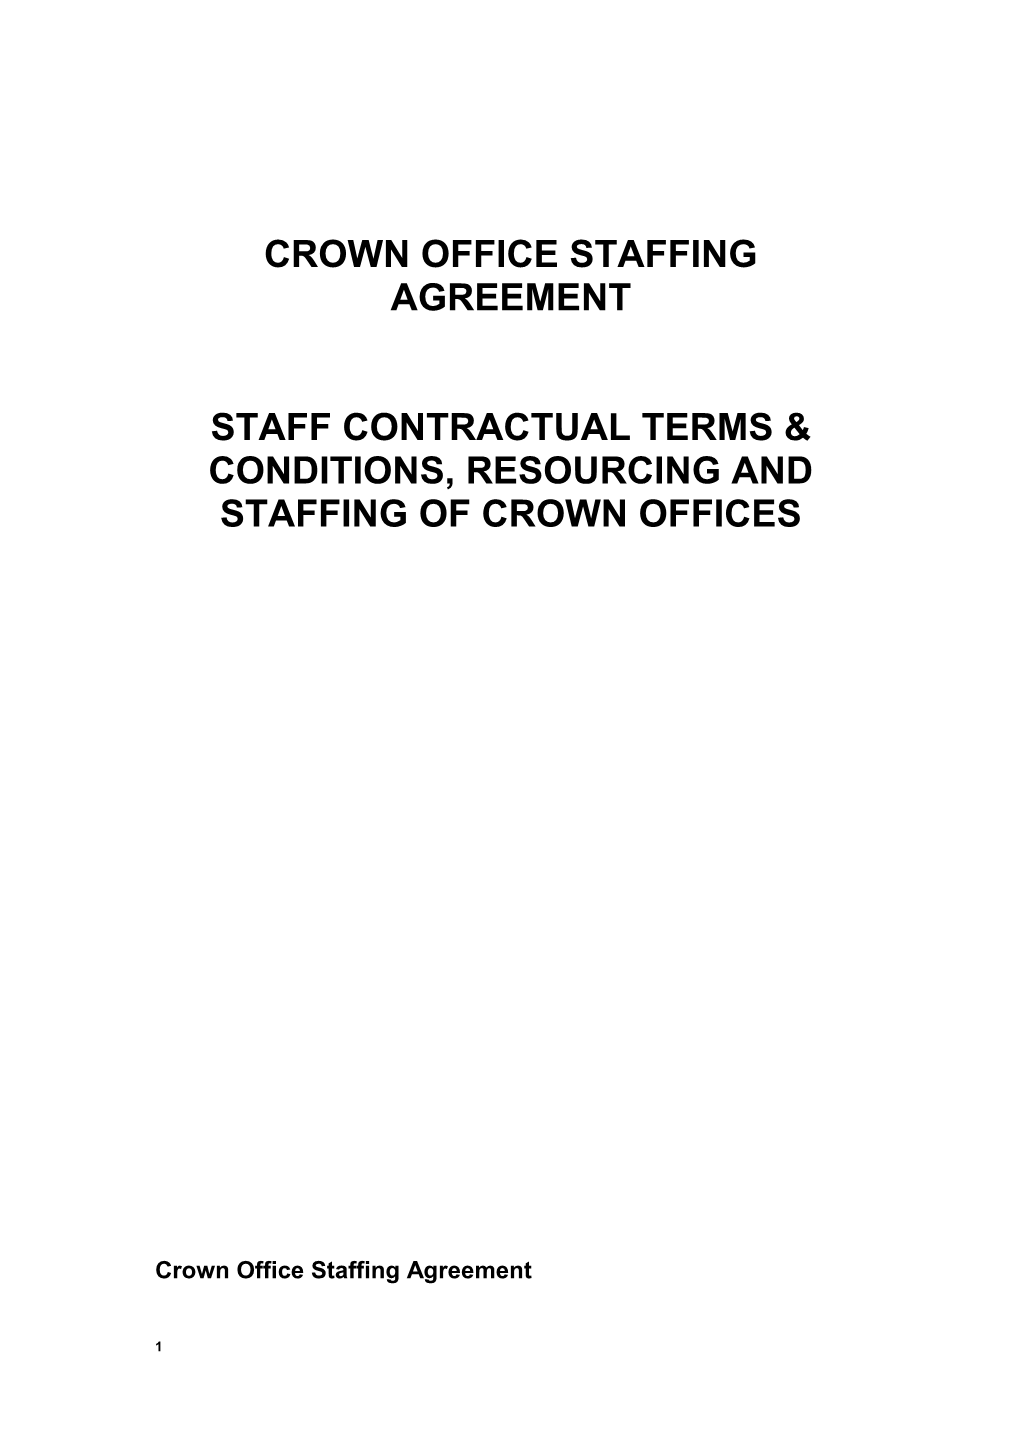 Crown Office Staffing Agreement